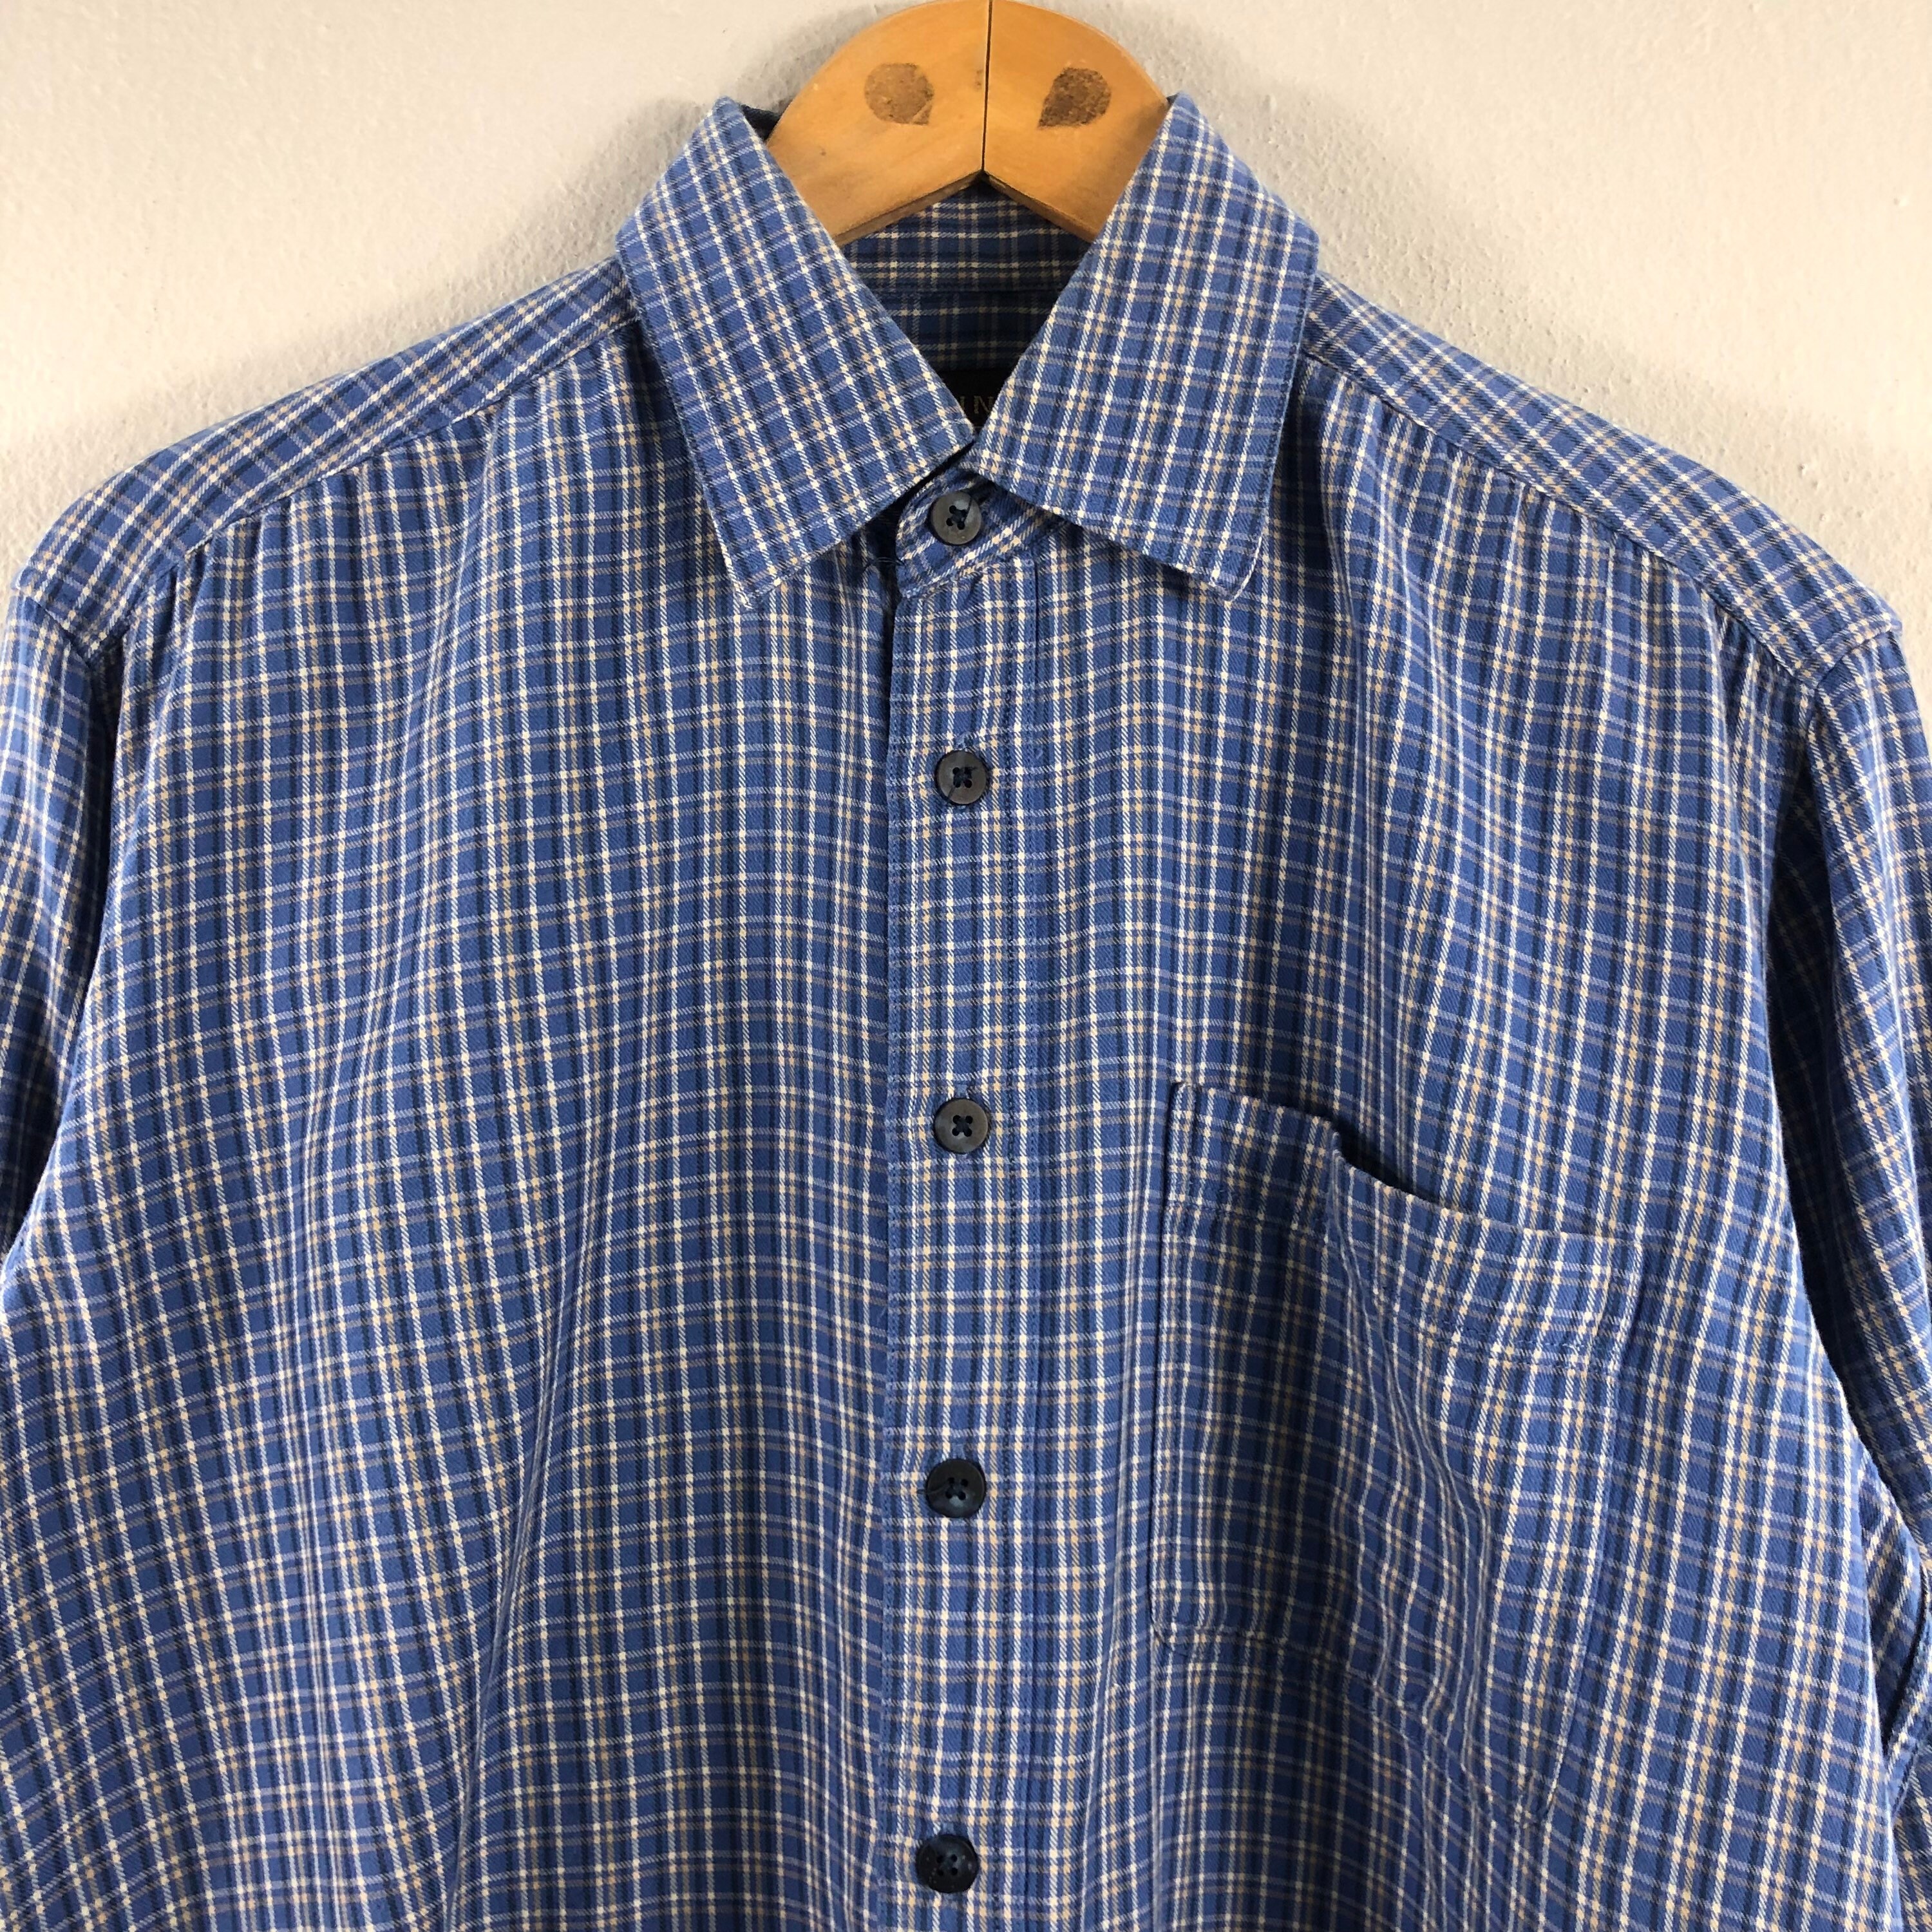 Casual Medium Vintage Blue Button Brand up Volunt Longsleeve Menswear Plaid Fashion Japanese Etsy Oxford Wear Outfits Shirt - Flannel Outfit